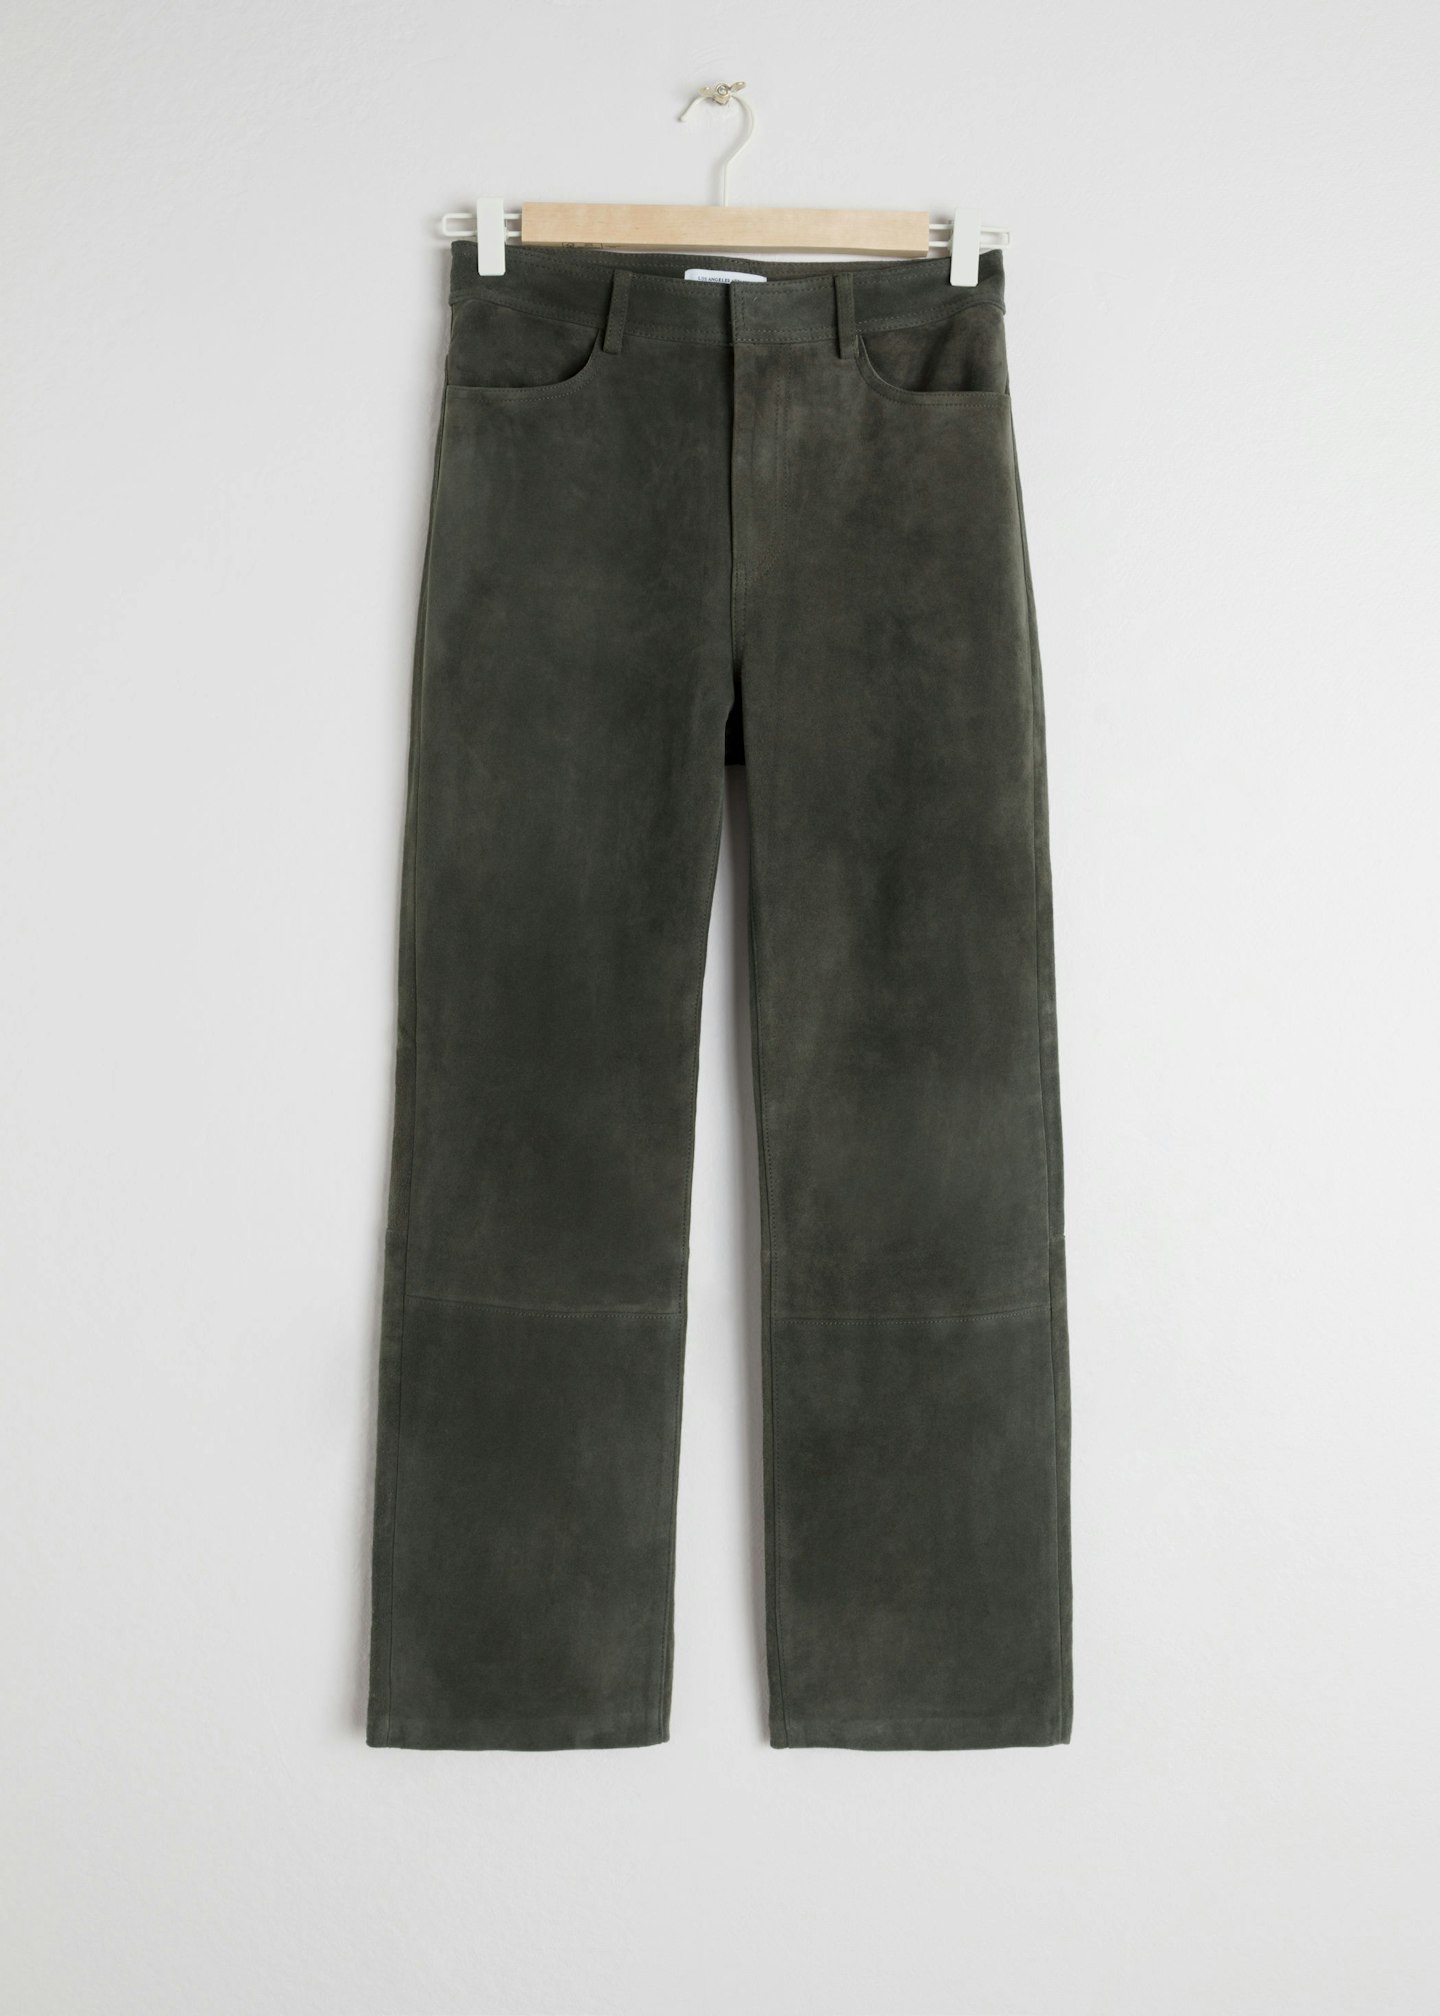 & Other Stories, Slim Fit Suede Trousers